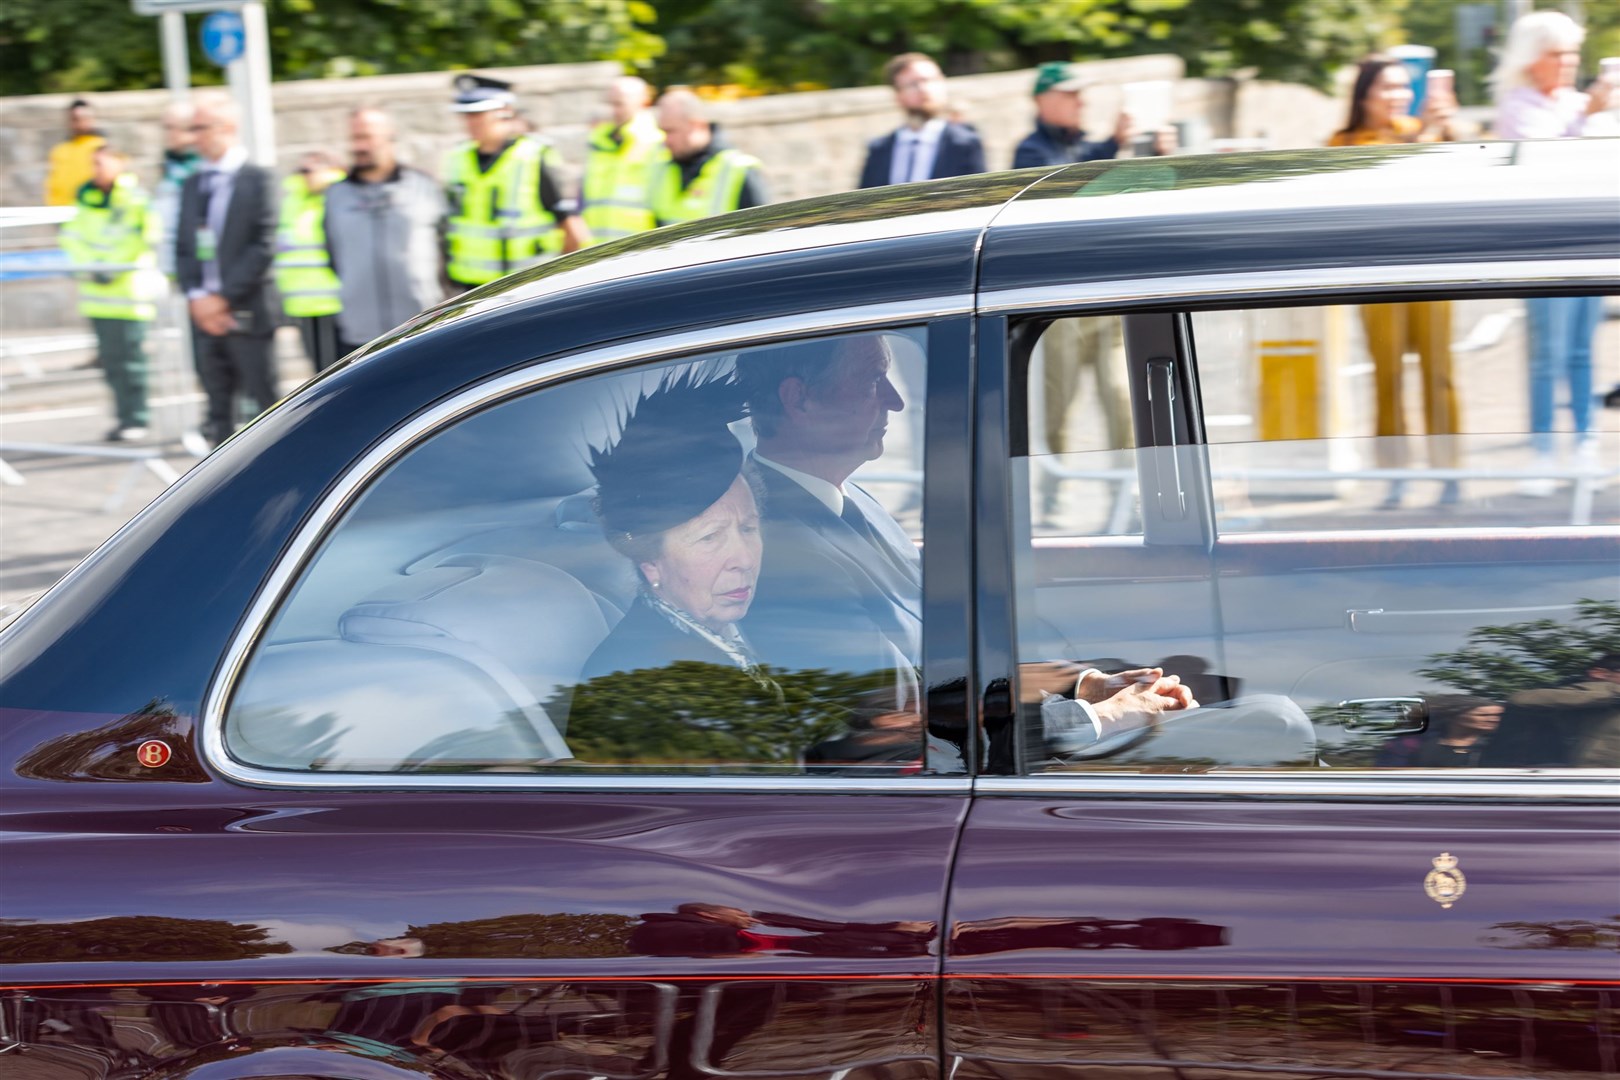 The Princess Royal and her husband Vice Admiral Sir Tim Laurence travel behind the hearse as it passes through Aberdeen (Paul Campbell/PA)